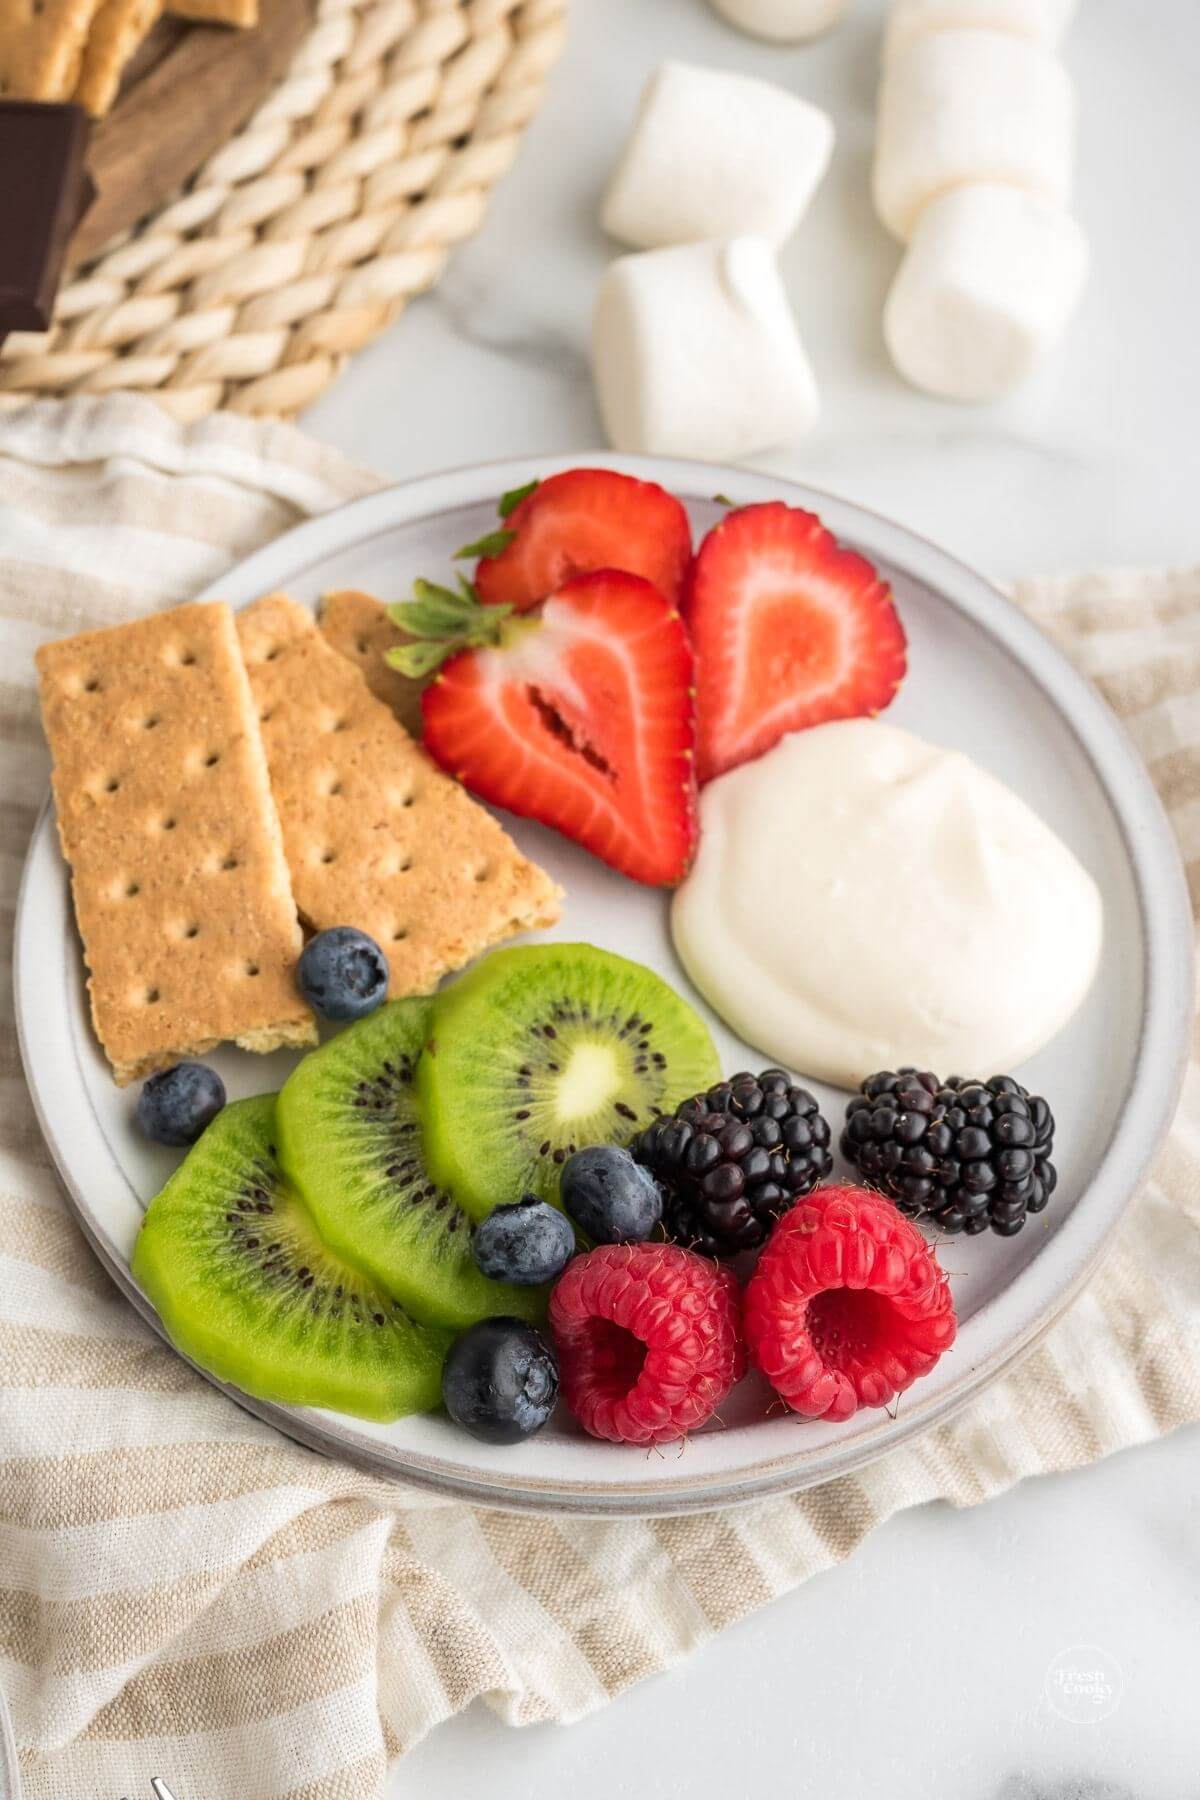 Plateful of fruit and graham crackers with a dollop of marshmallow fruit dip.